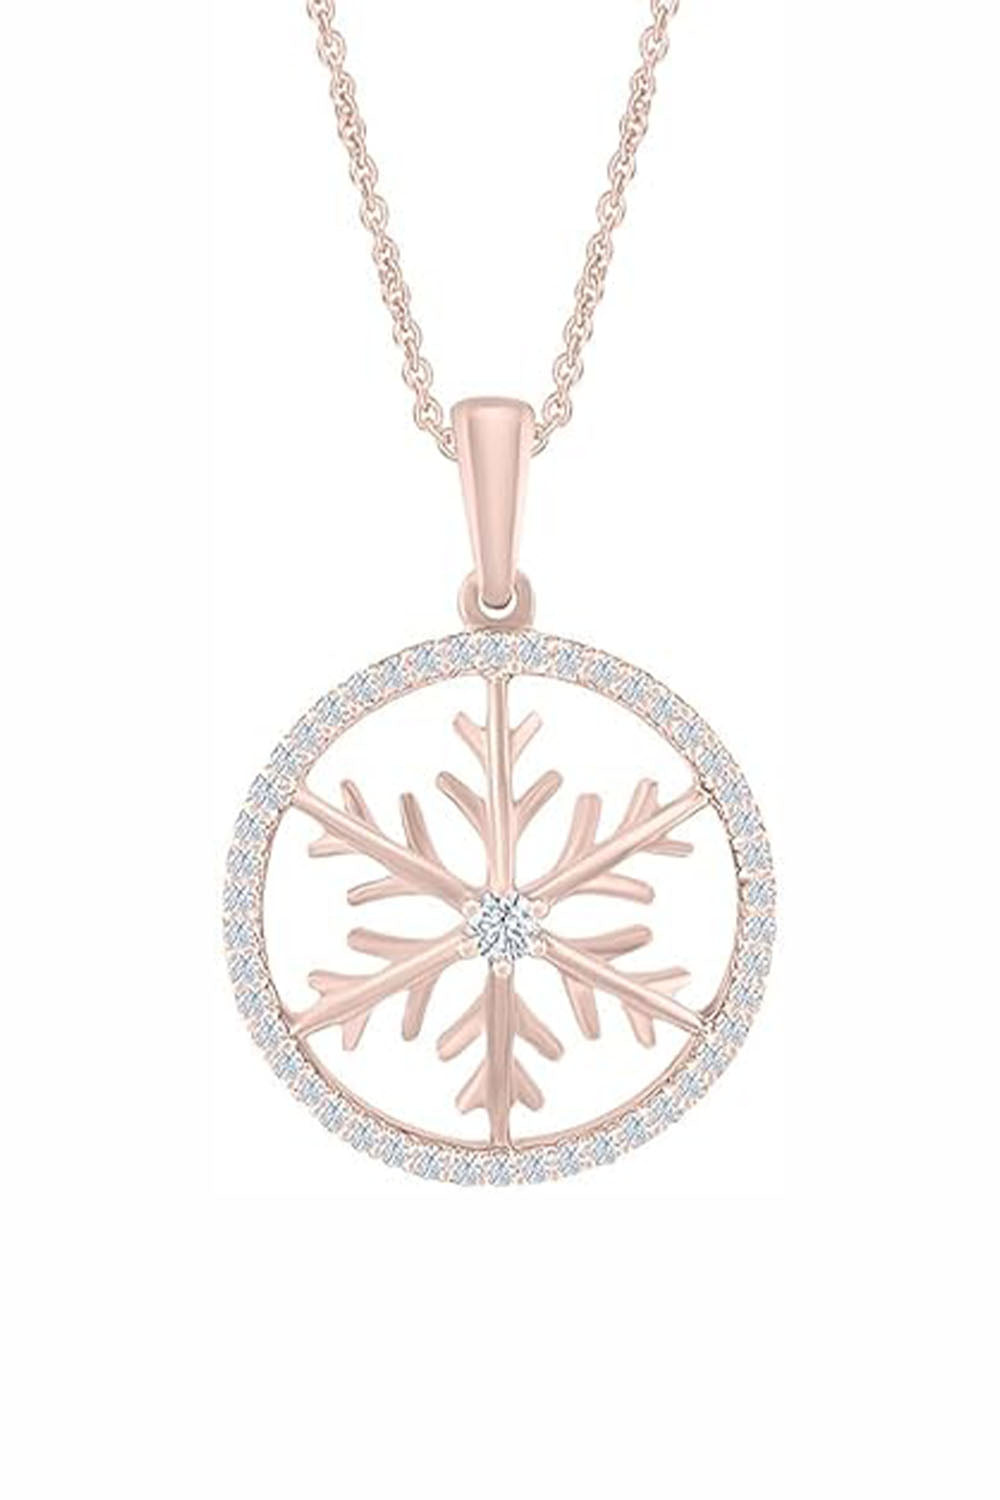 Rose Gold Color Branch Snowflake Pendant Necklace, Fashion Jewellery